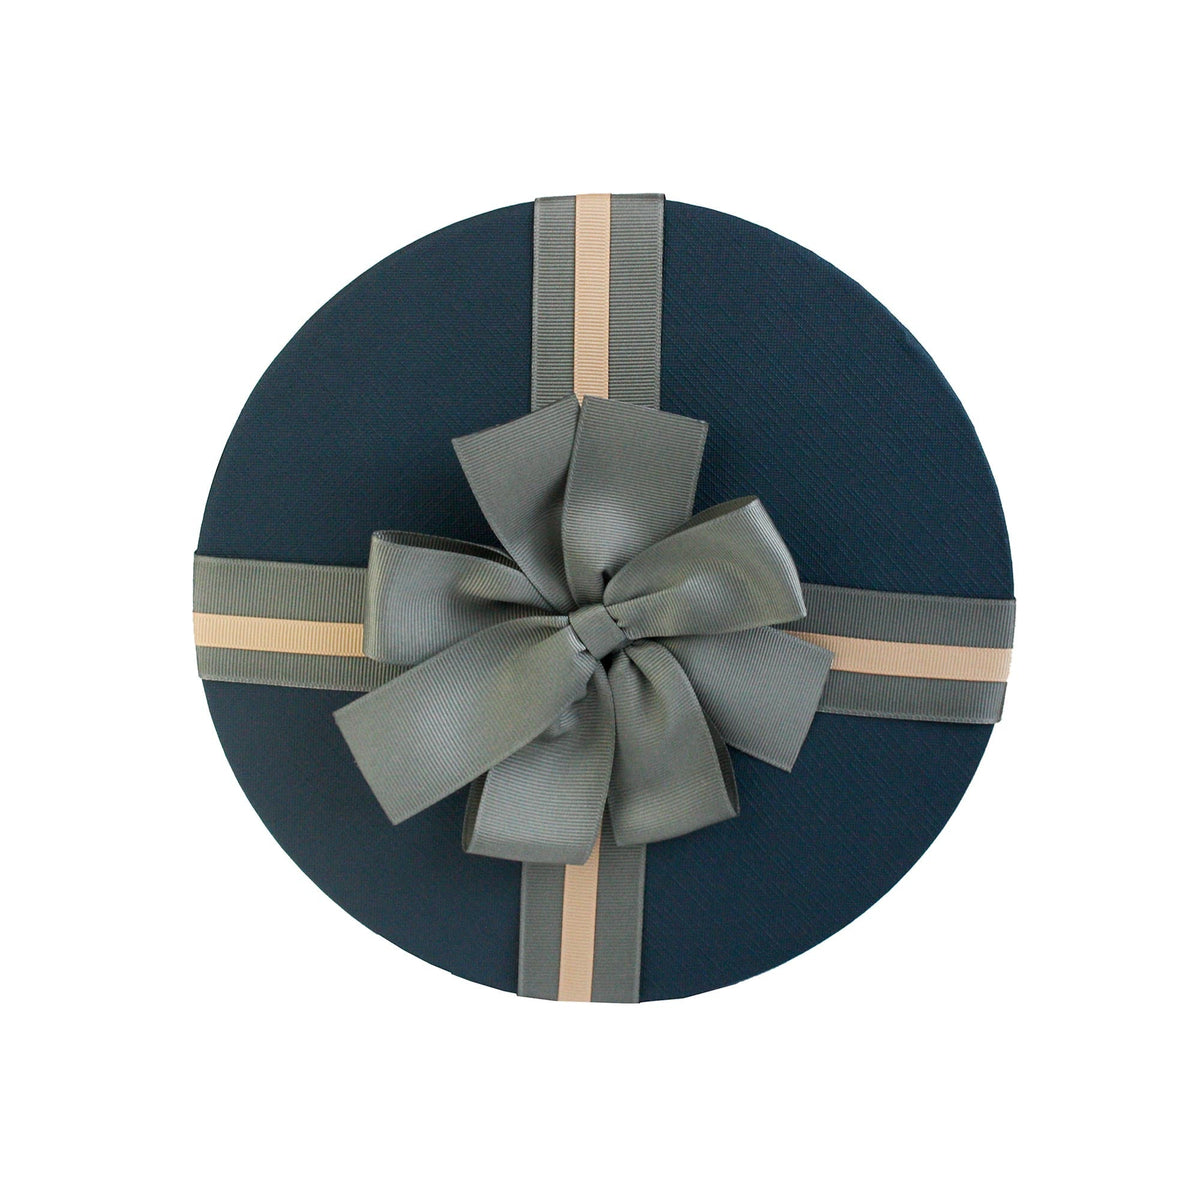 Single White Blue with Striped Brown Ribbon Gift Box (Sizes Available)